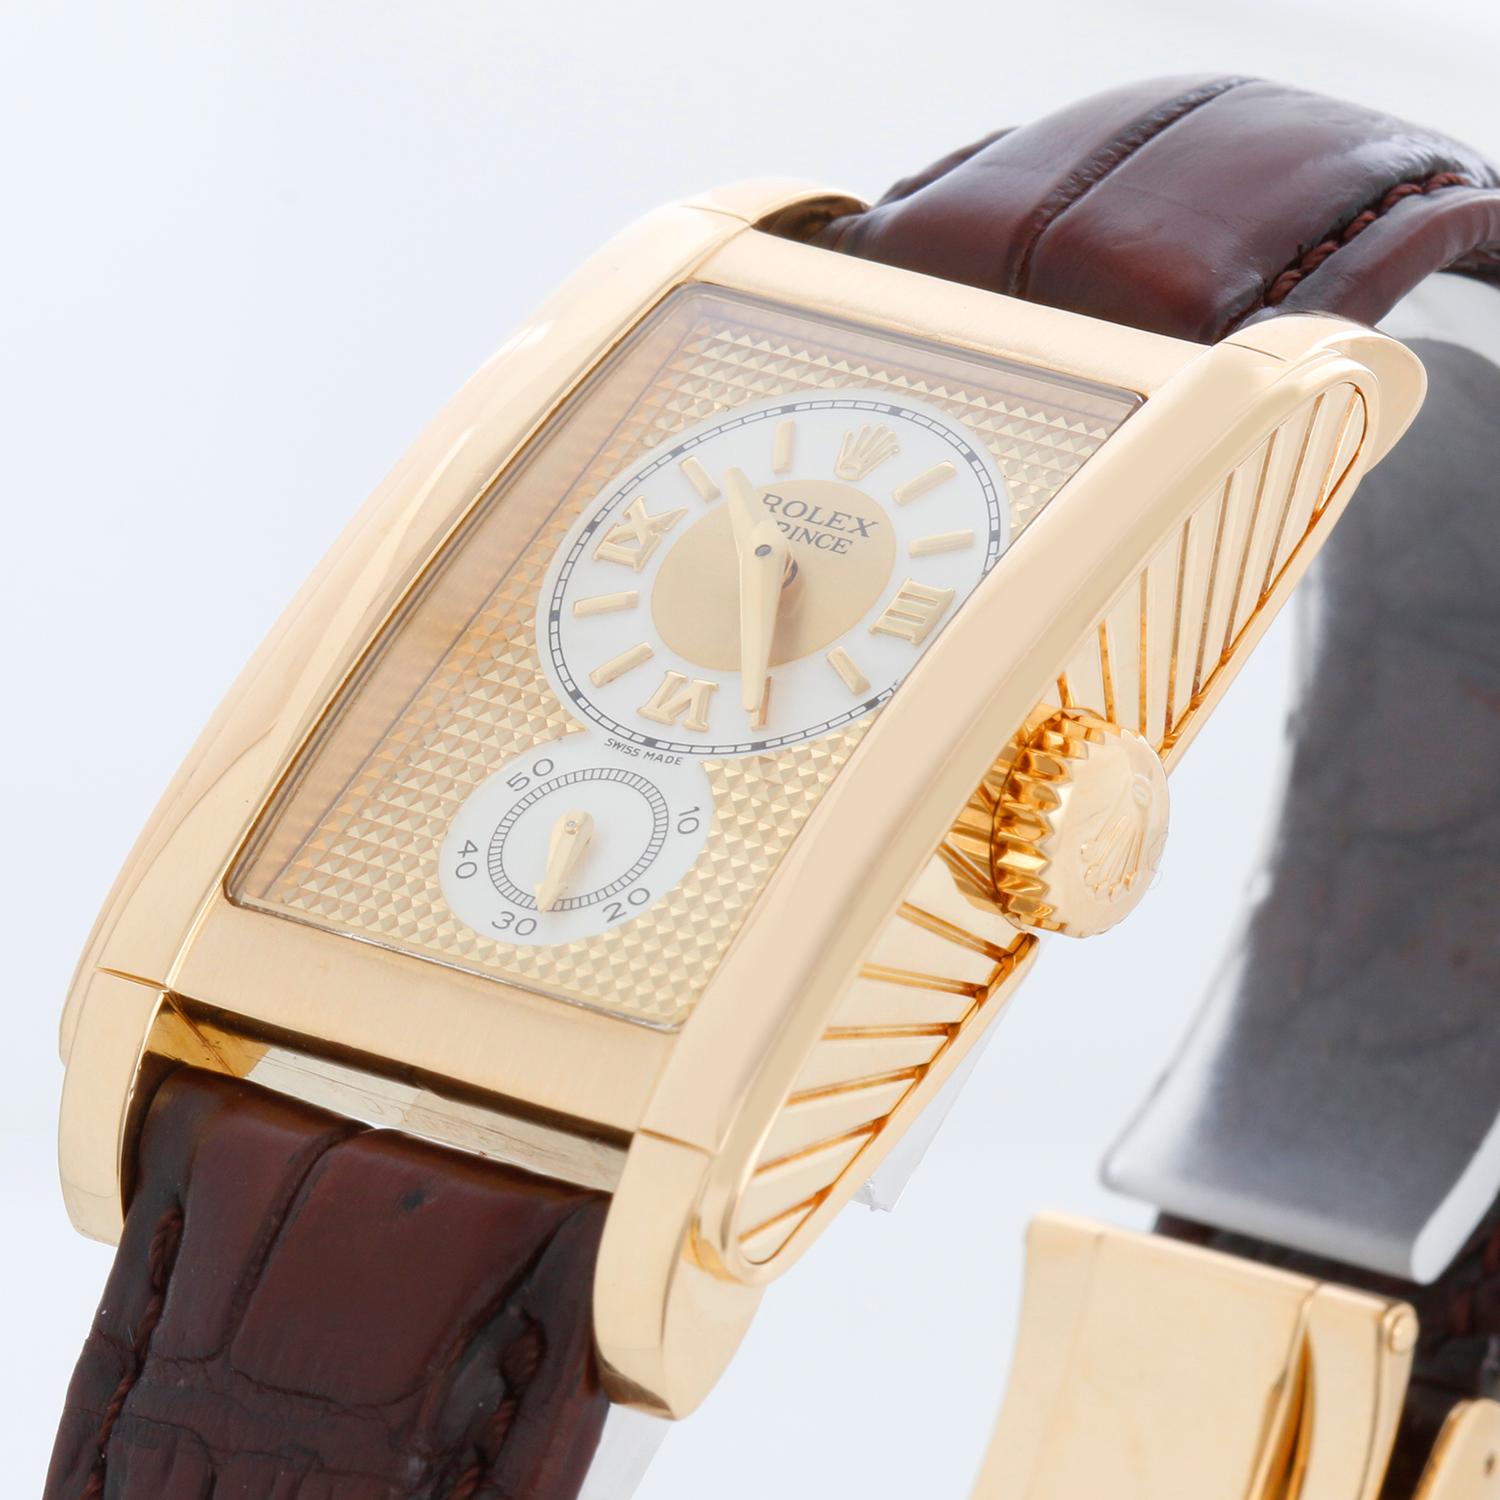 Rolex Prince Cellini Men's 18k Yellow Gold Watch 5440/8 In Excellent Condition For Sale In Dallas, TX